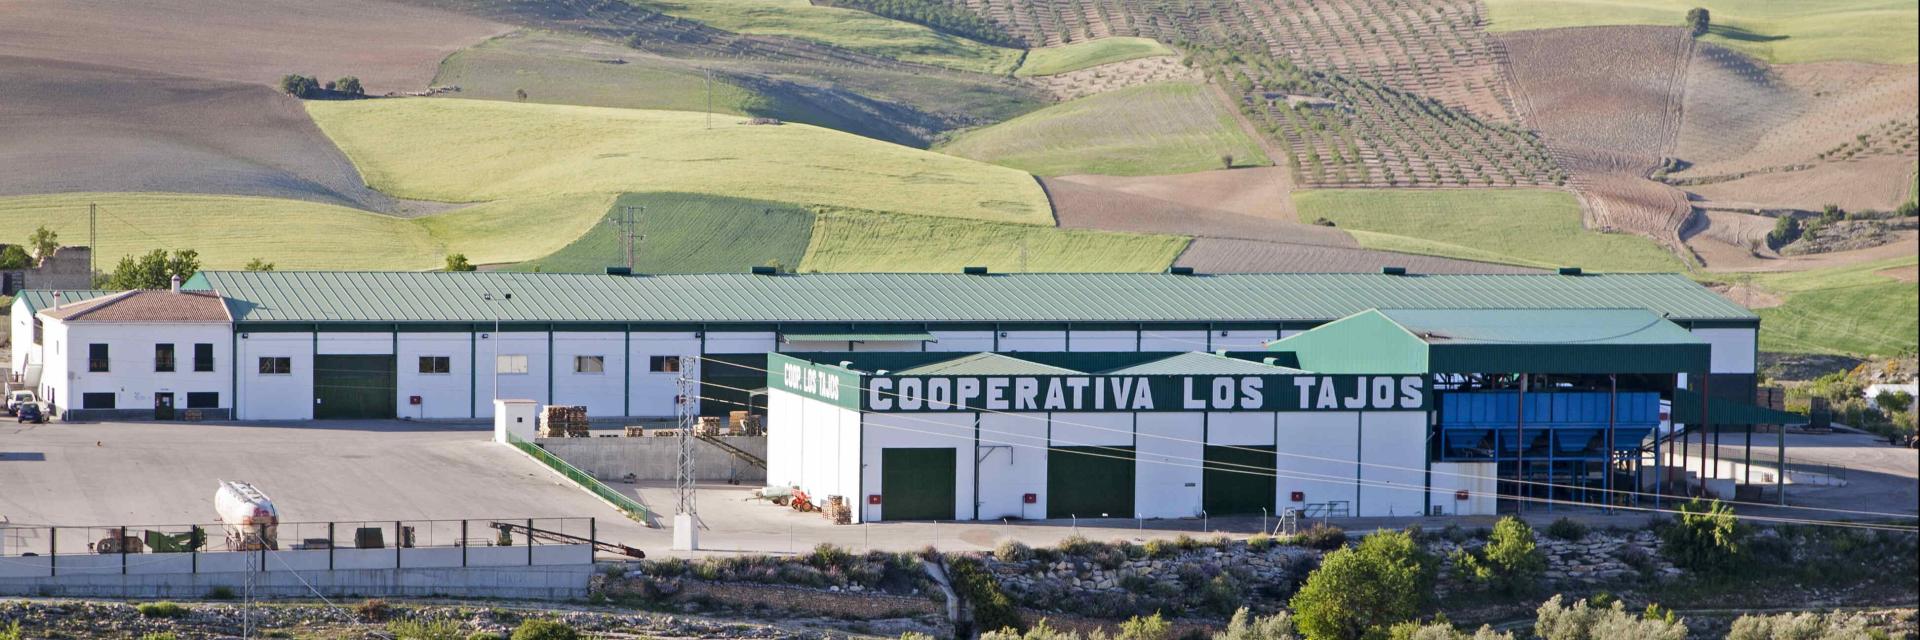 Landscape shot of Los Tajos Cooperative agricultural processing center, in the countryside near Alhama de Granada, Spain.